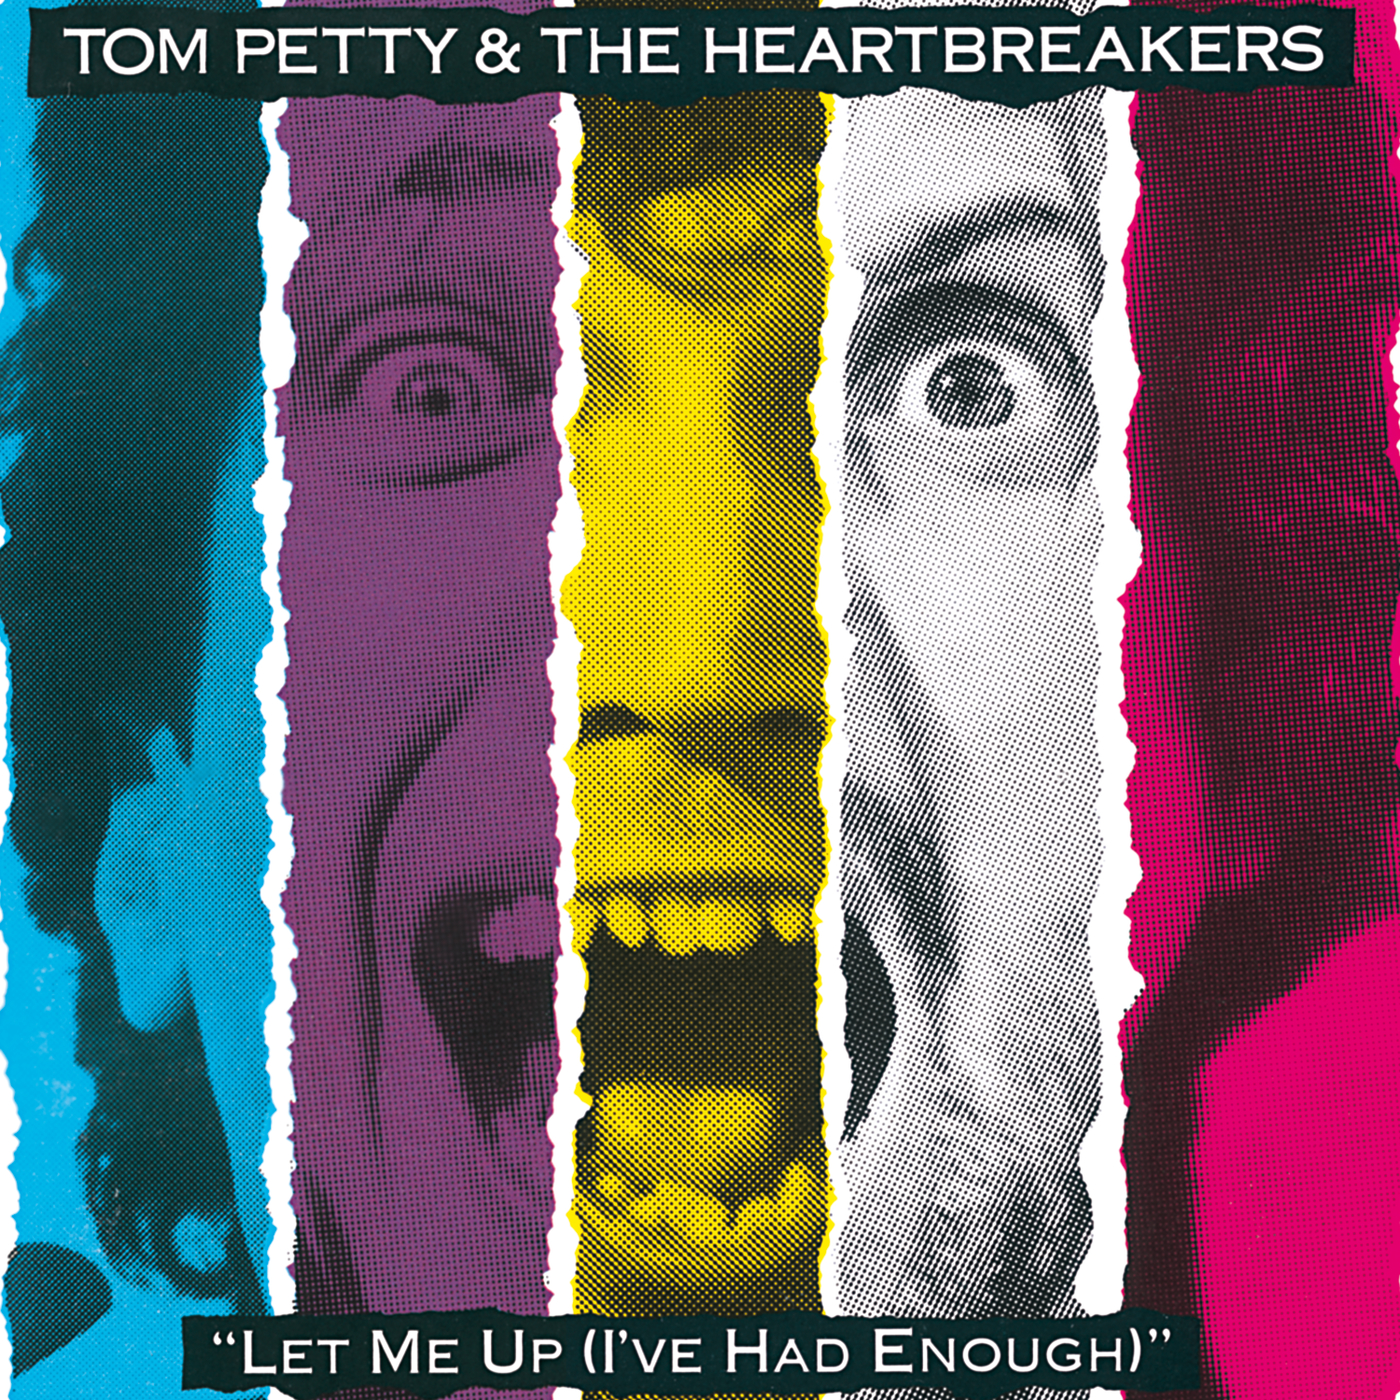 Tom Petty & The Heartbreakers - 1987 - Let Me Up (I've Had Enough) [2015] 24-96